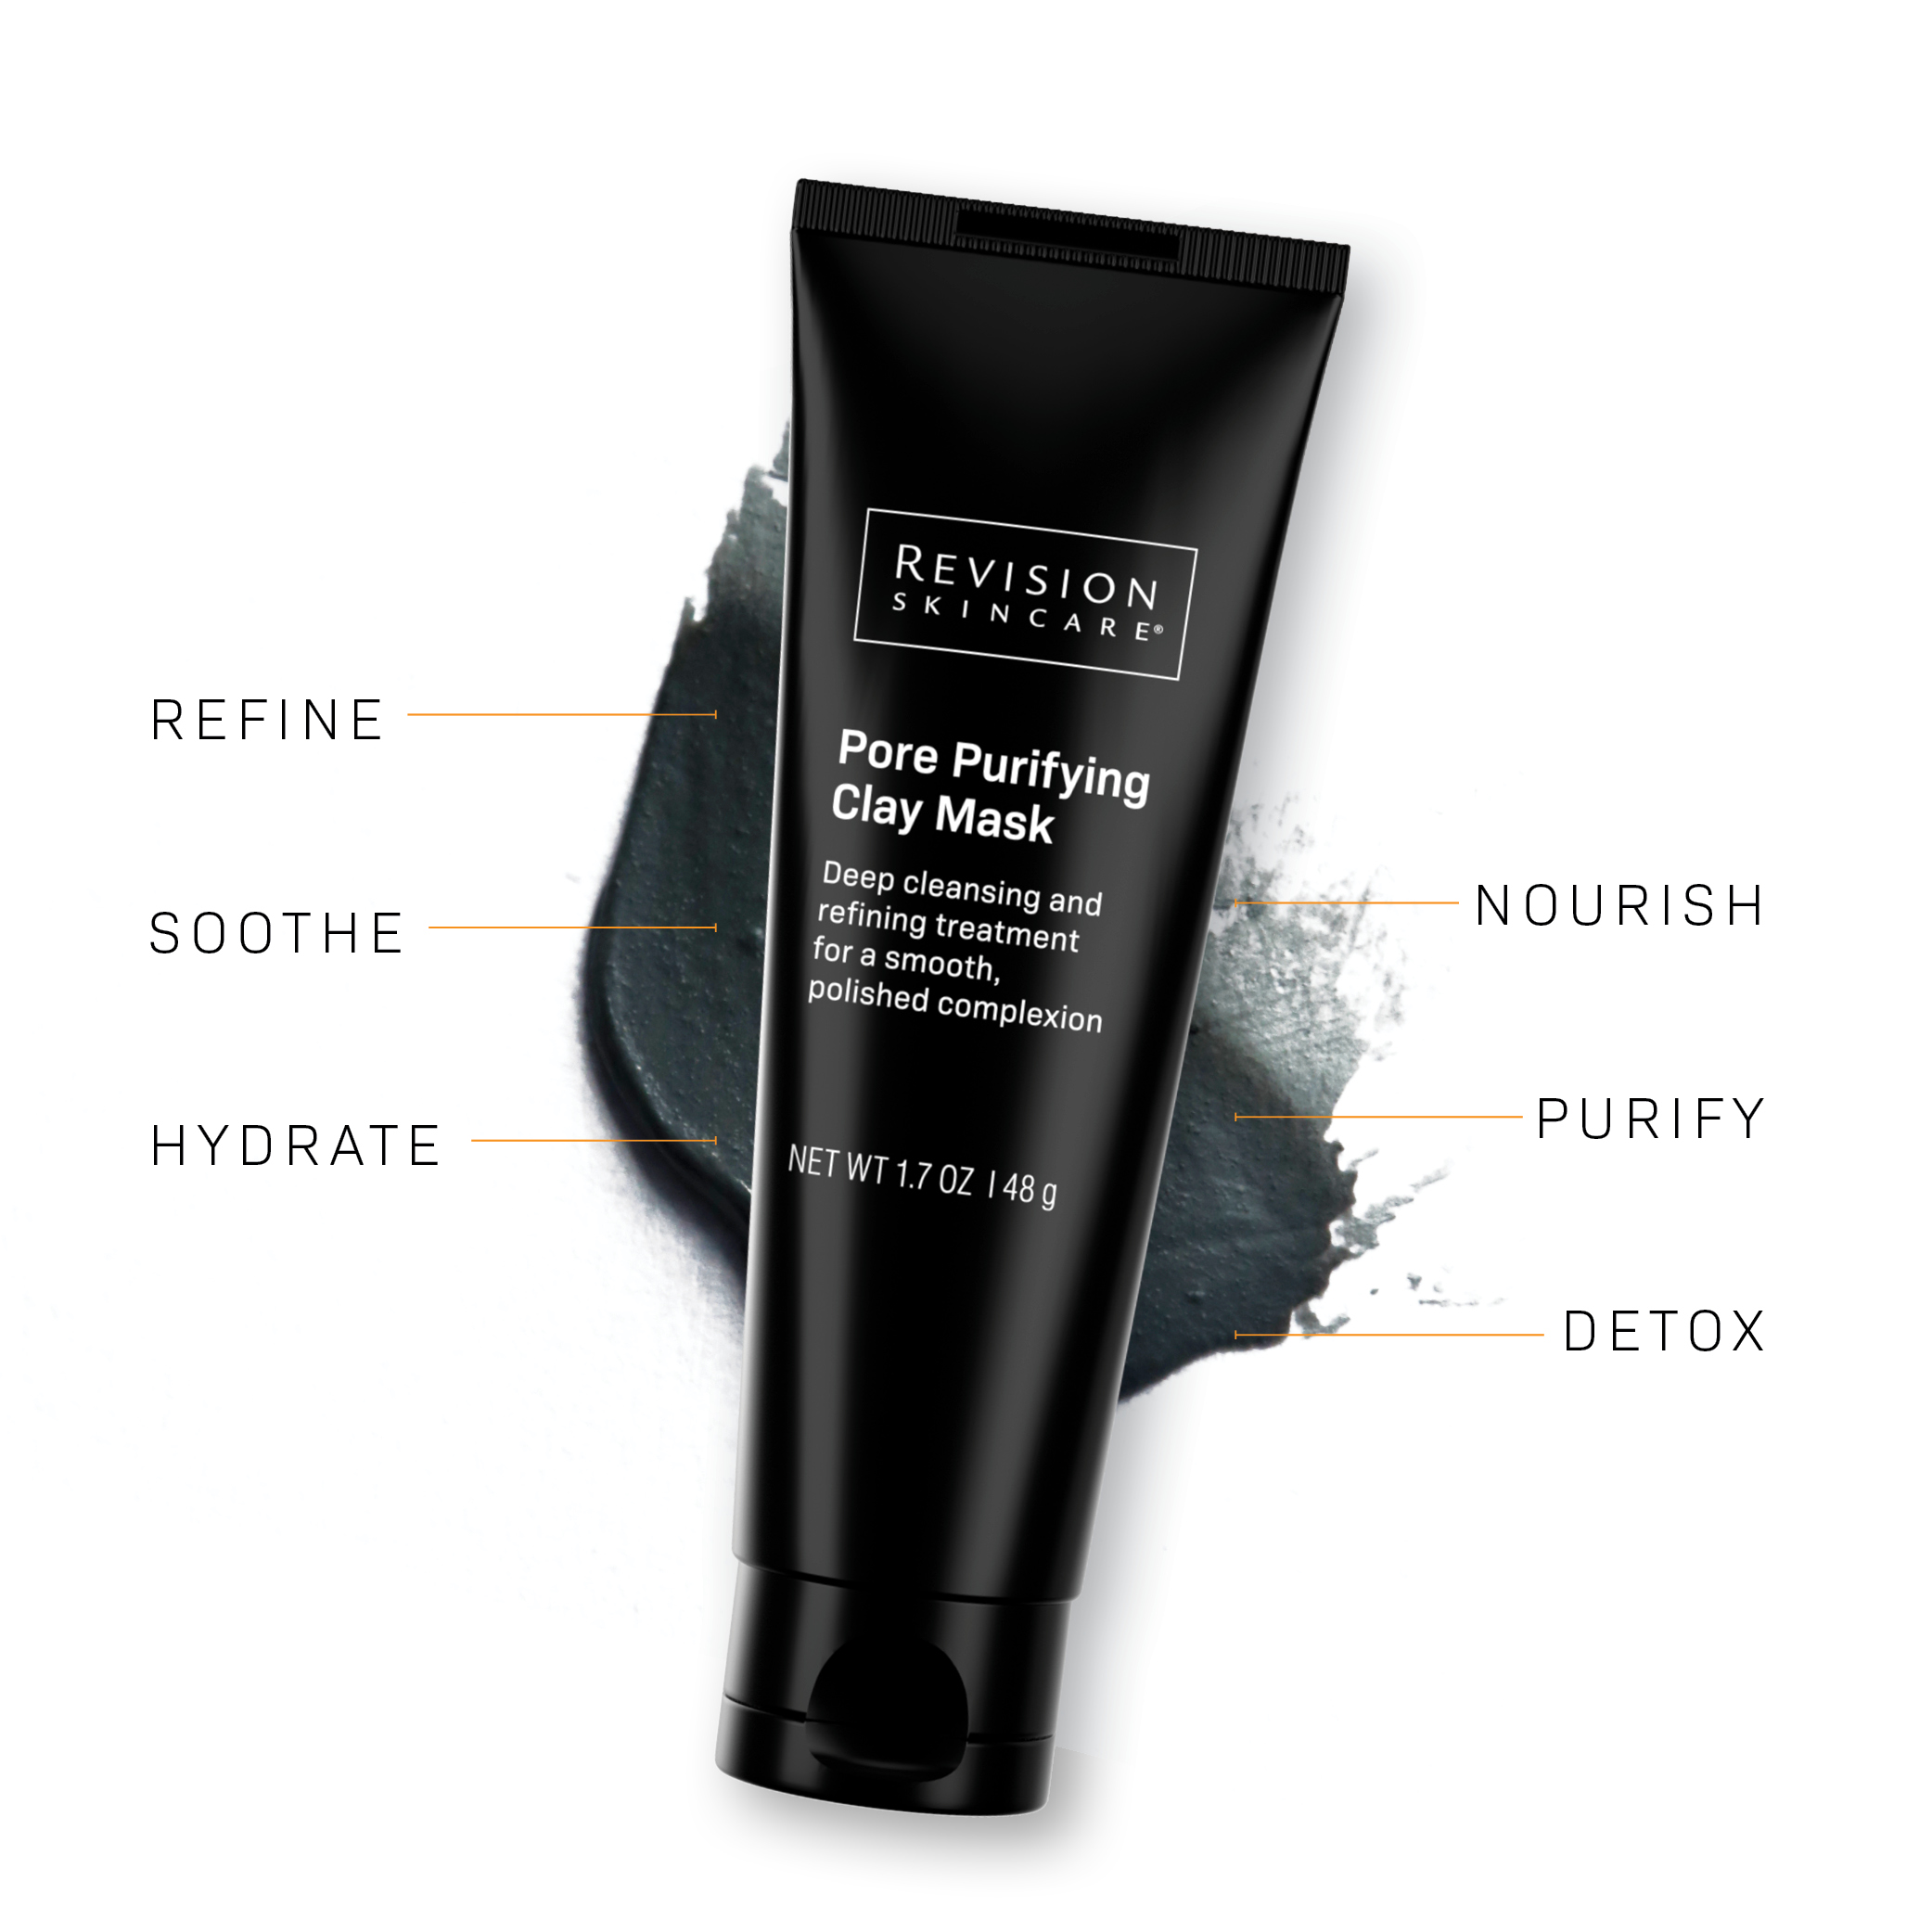 Revision Pore Purifying Clay Mask Benefits